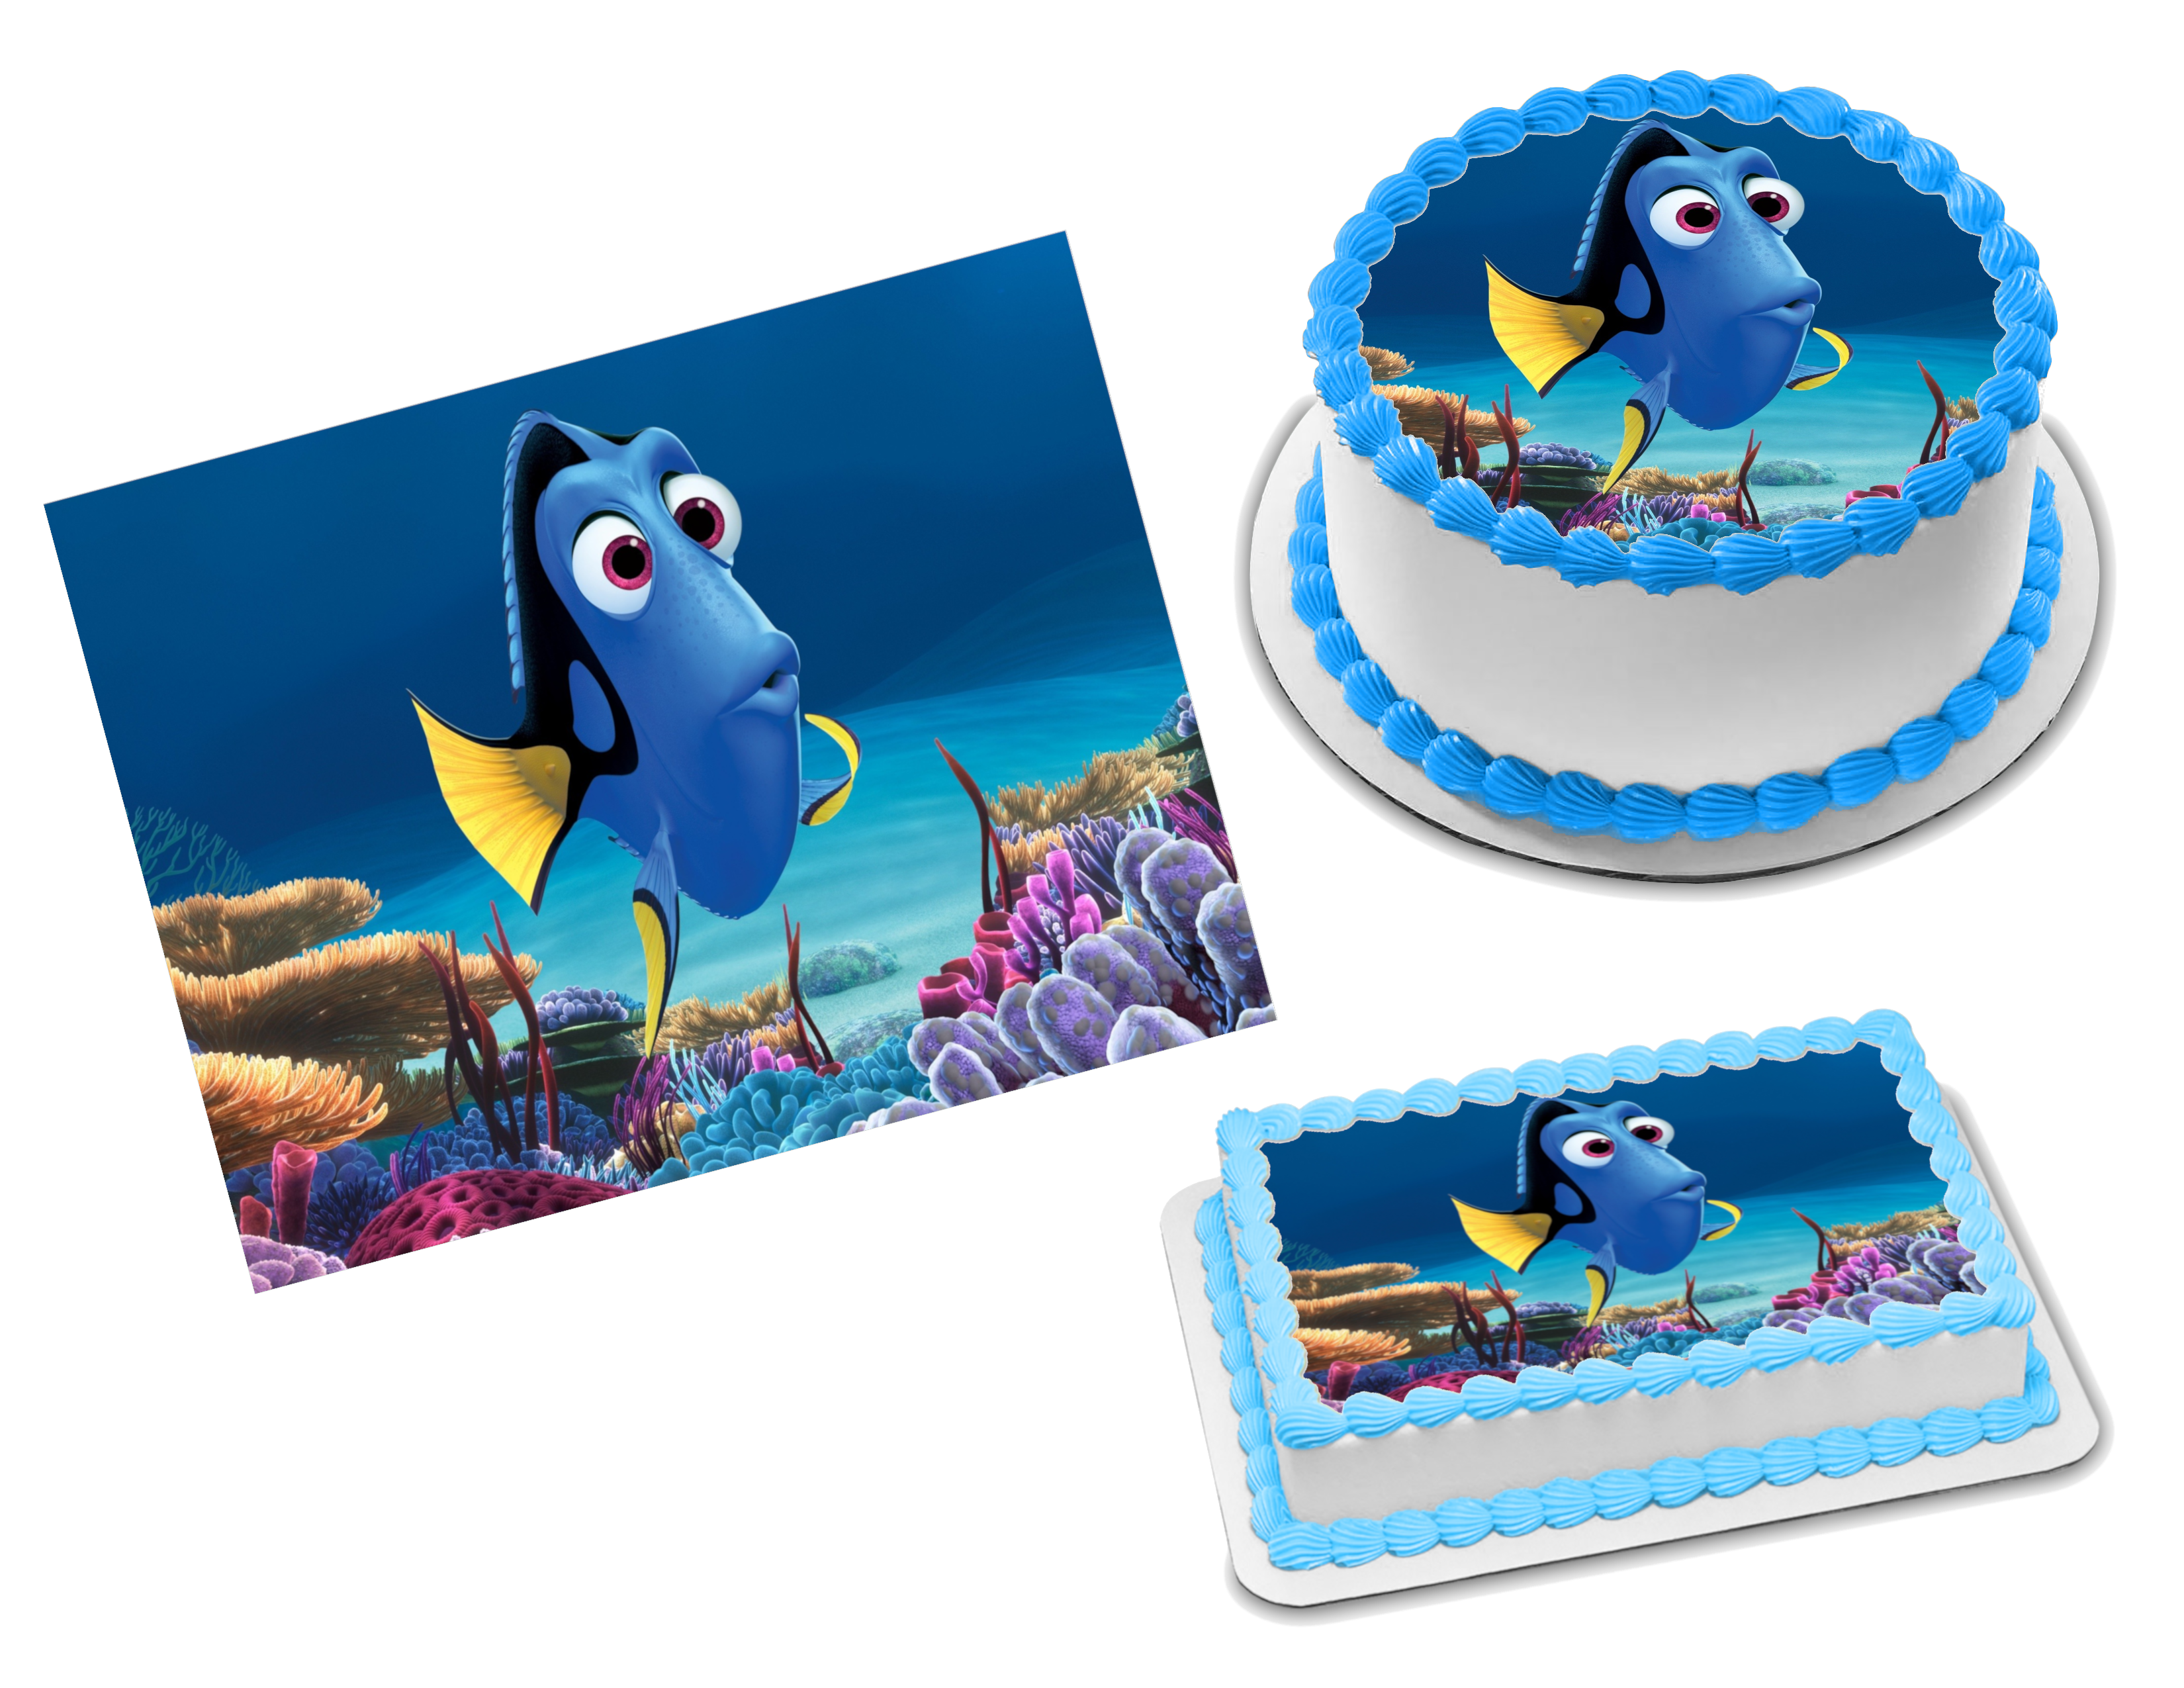 HAPPY CHOICES 30 x Edible Cupcake Toppers Themed of Finding Nemo India |  Ubuy